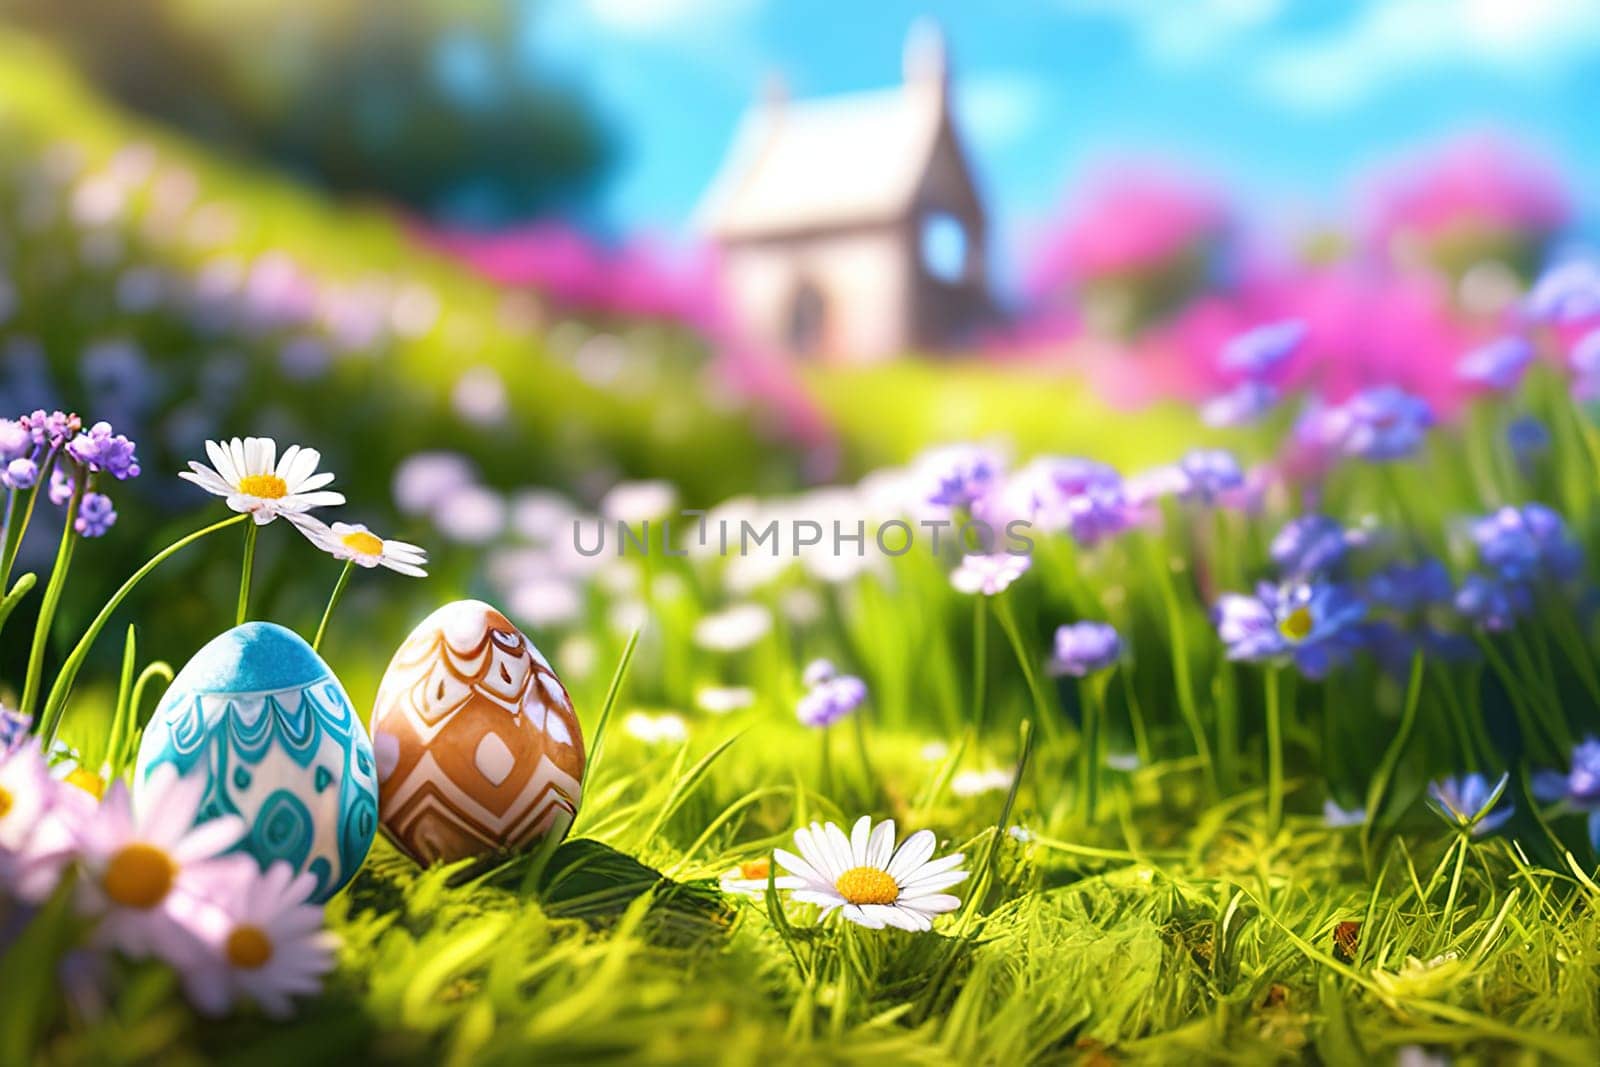 Basket of easter eggs on green grass with flowers at sunny day.